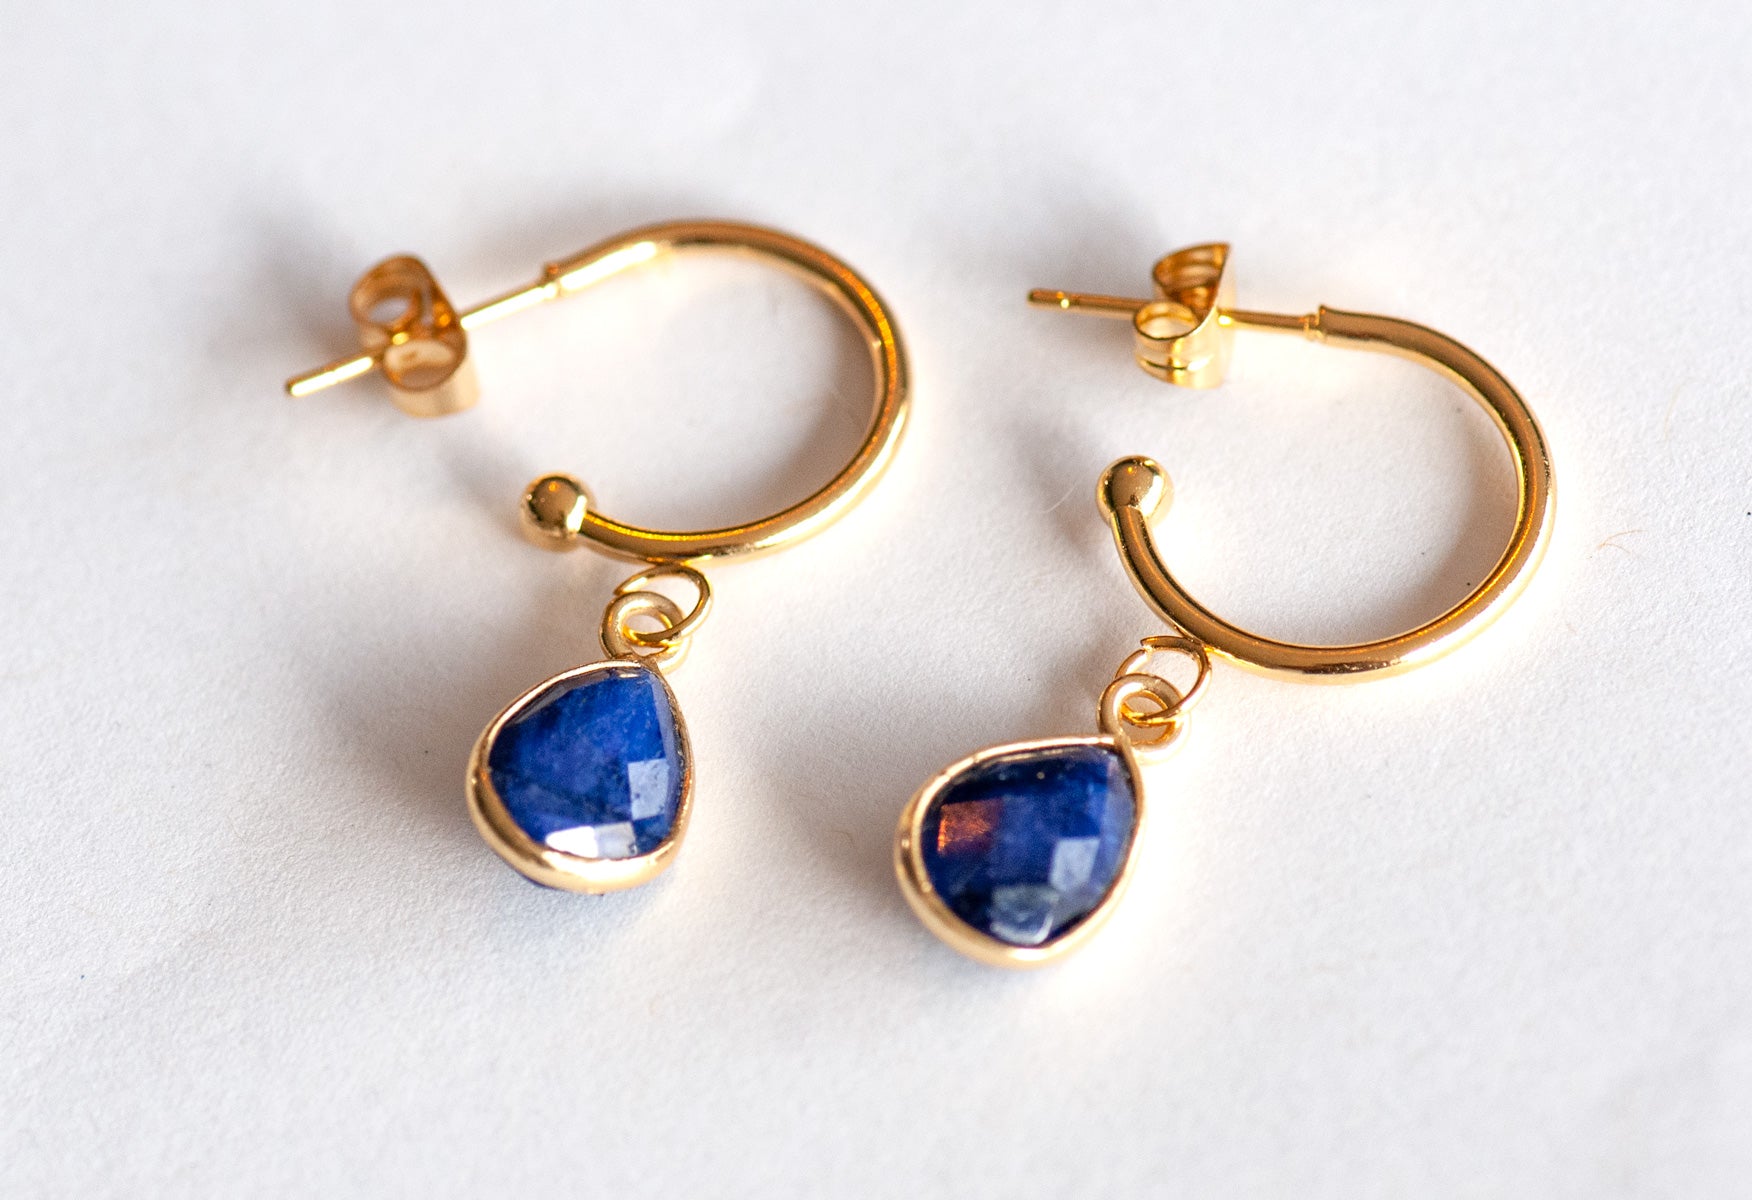 Sapphire earrings with gold hoops for September birthstone